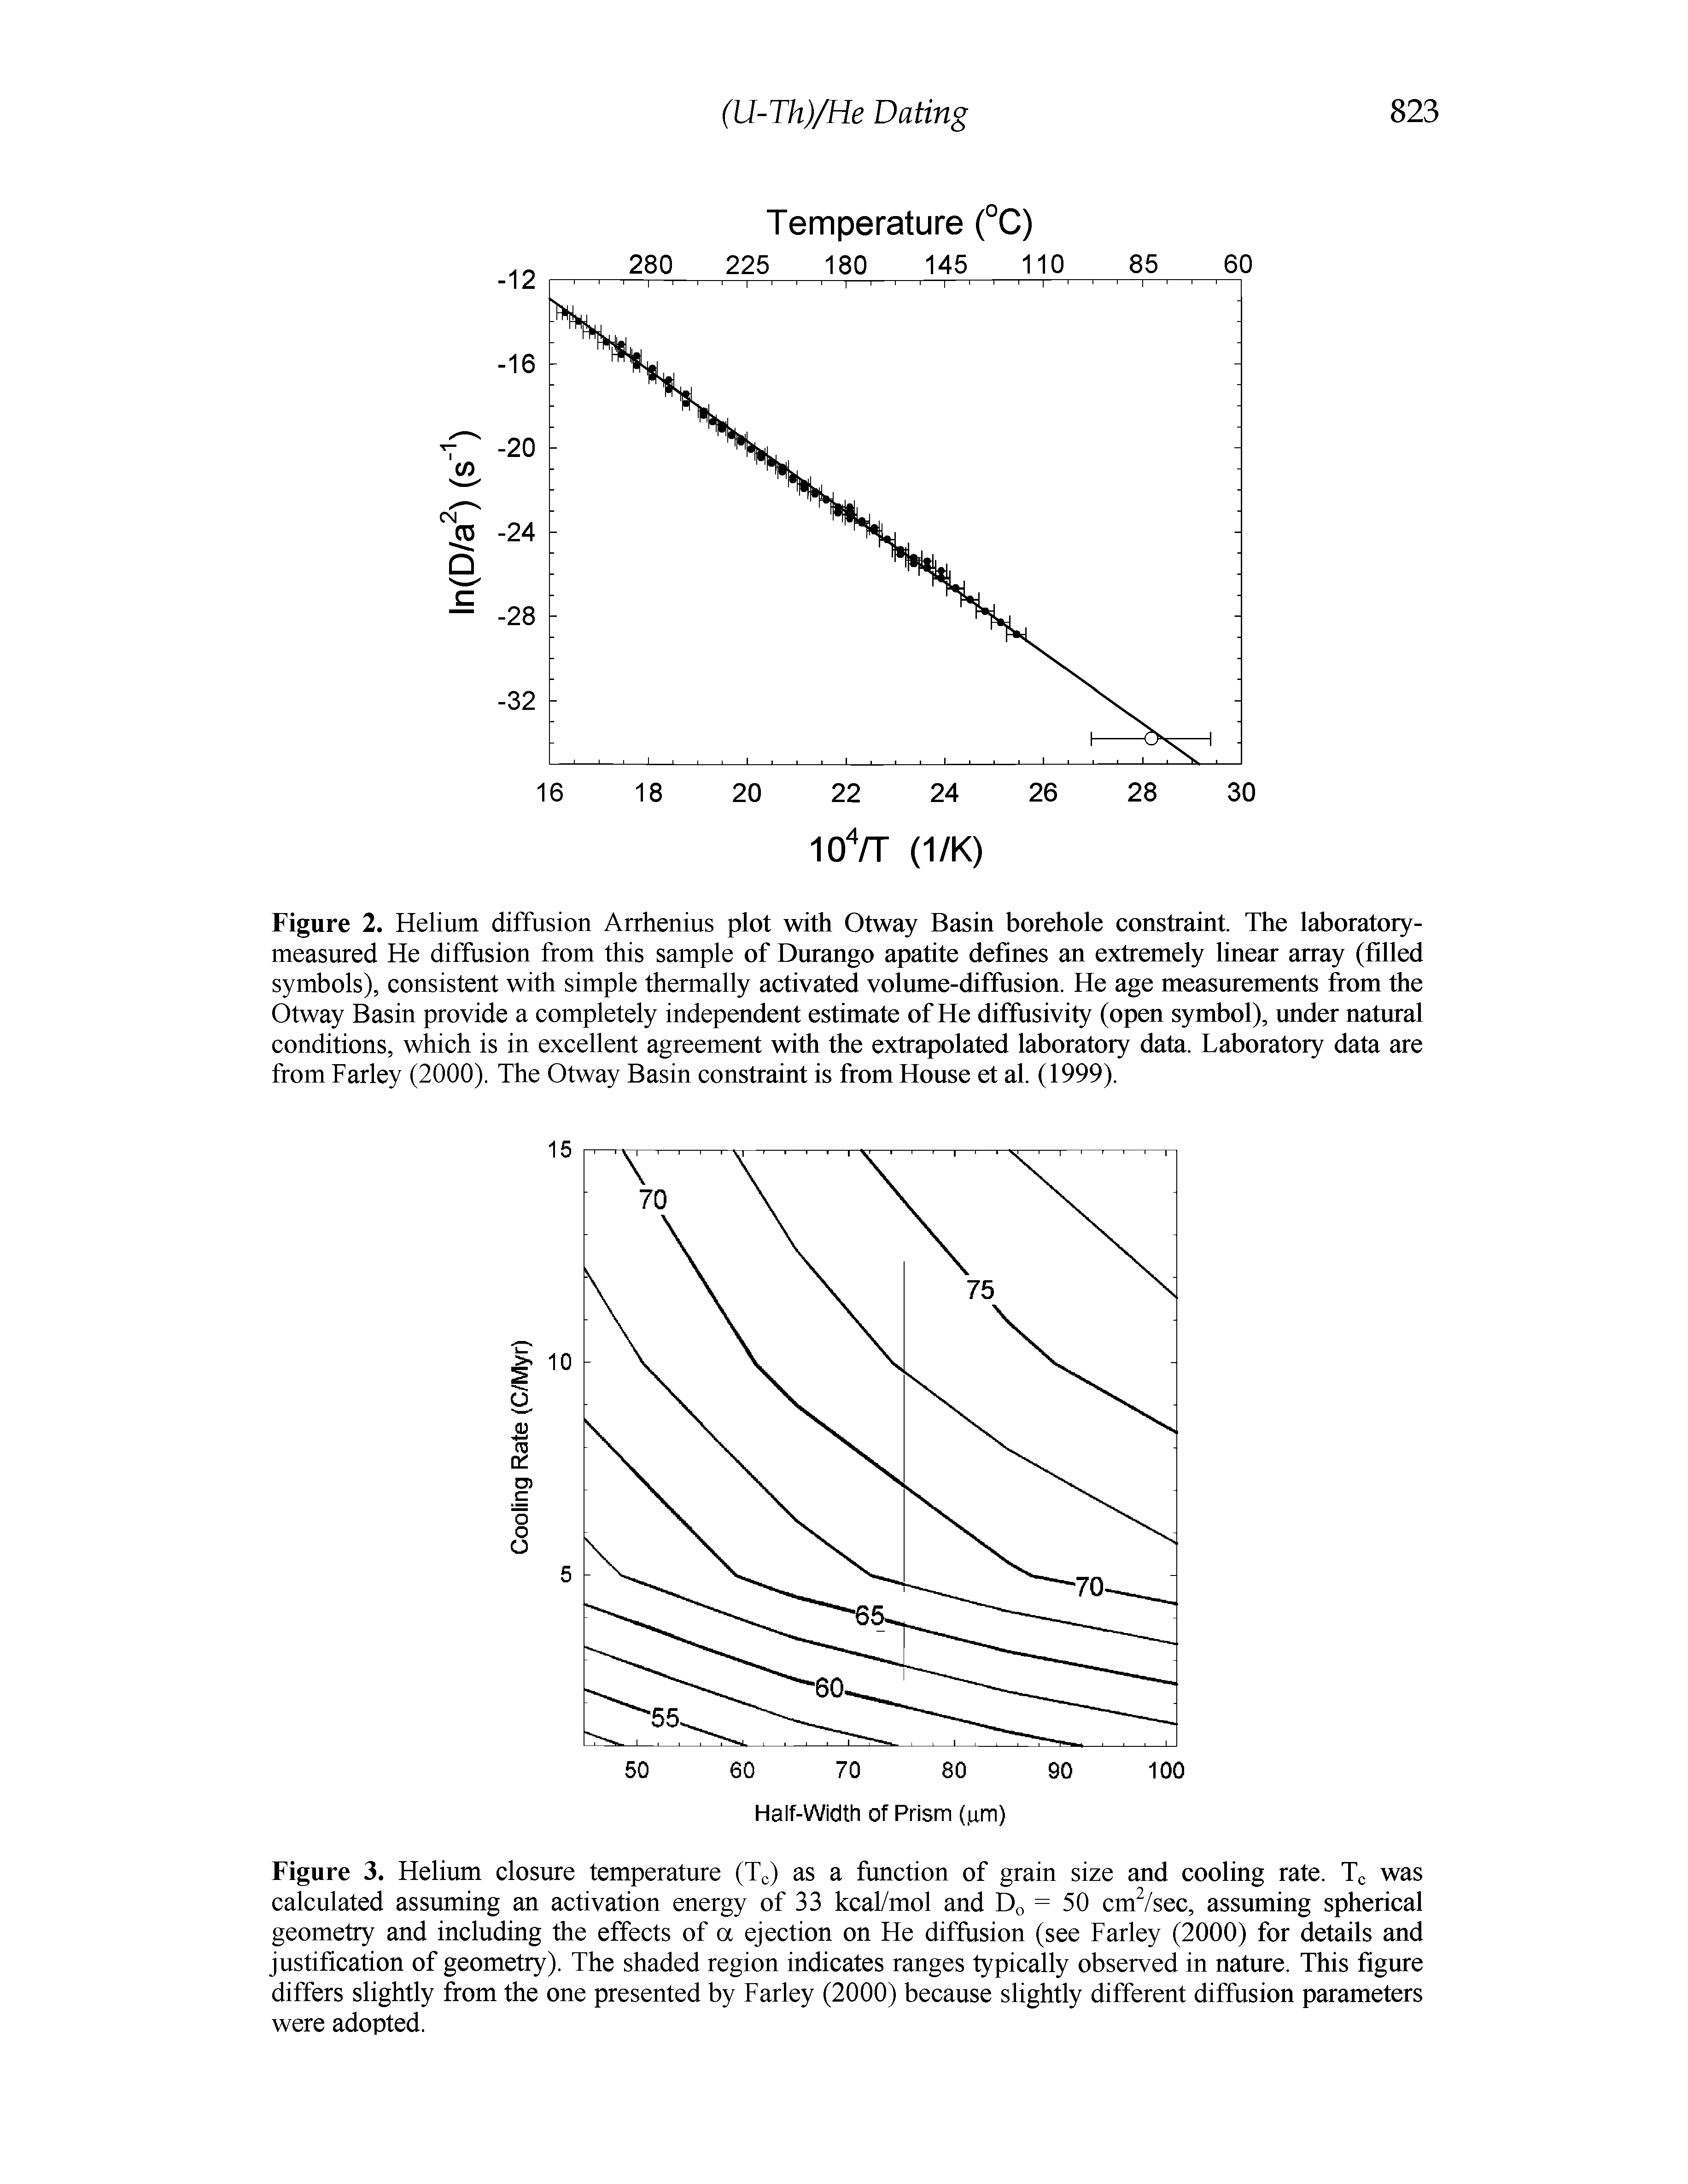 Figure 2. Helium diffusion Arrhenius plot with Otway Basin borehole constraint. The laboratory-measured He diffusion from this sample of Durango apatite defines an extremely linear array (filled symbols), consistent with simple thermally activated volume-diffusion. He age measurements from the Otway Basin provide a completely independent estimate of He diffusivity (open symbol), under natural conditions, which is in excellent agreement with the extrapolated laboratory data. Laboratory data are from Farley (2000). The Otway Basin constraint is from House et al. (1999).